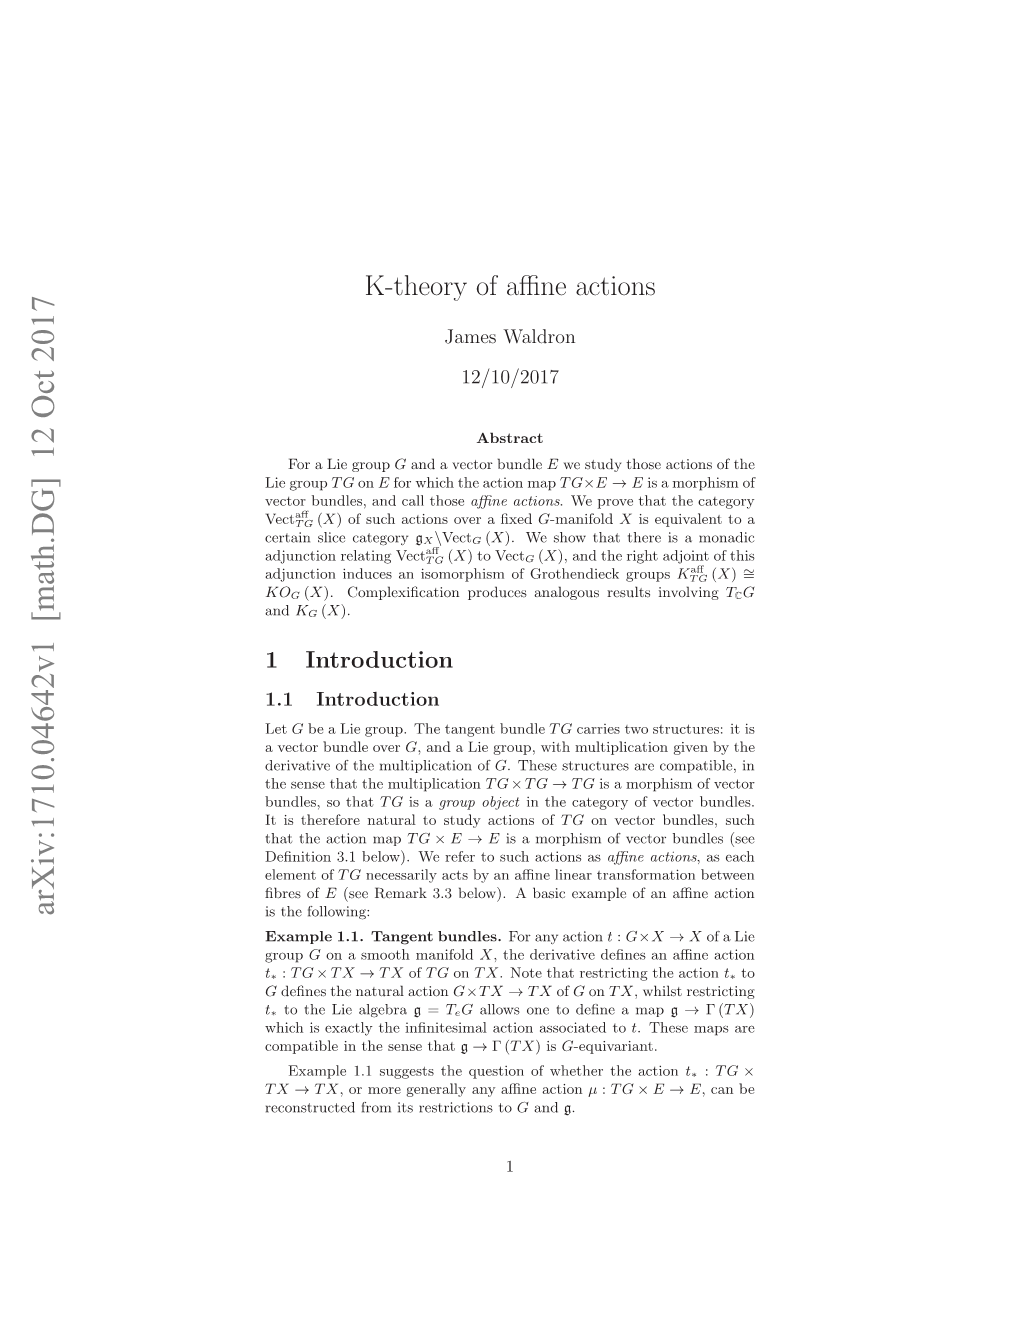 K-Theory of Affine Actions